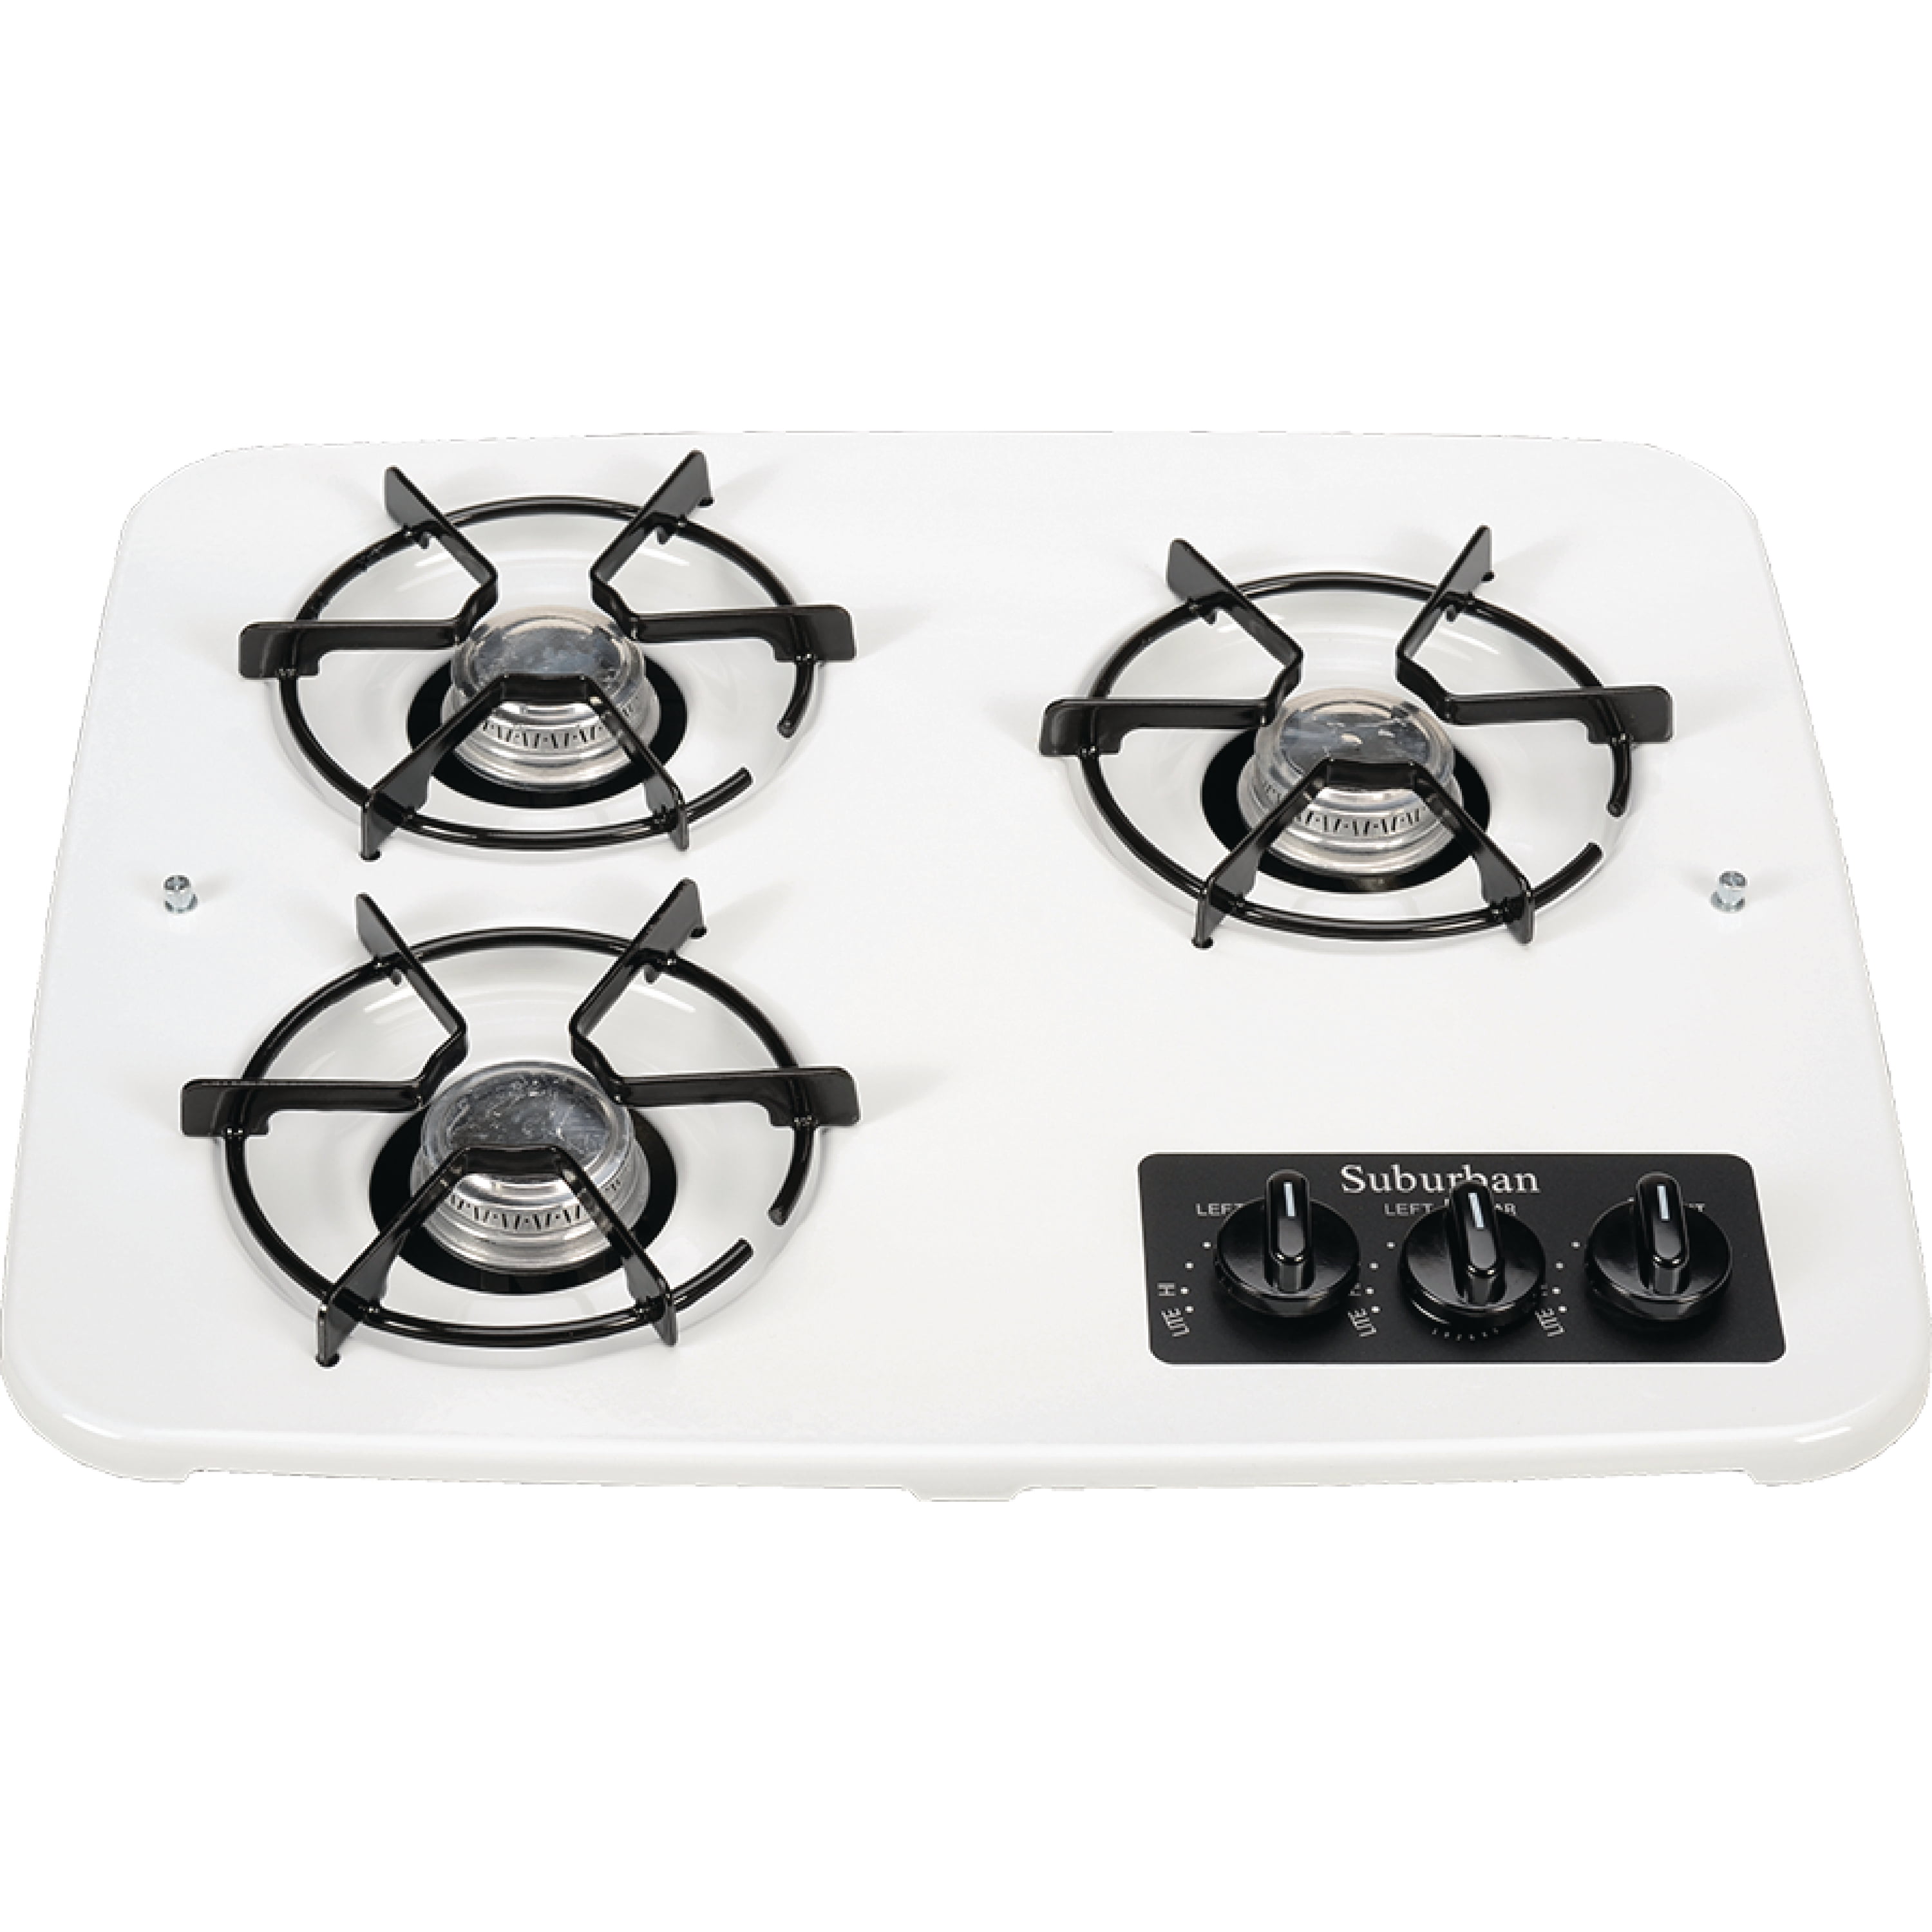 Flame King 2-Burner Drop-In RV Cooktop Stove, Includes Cover